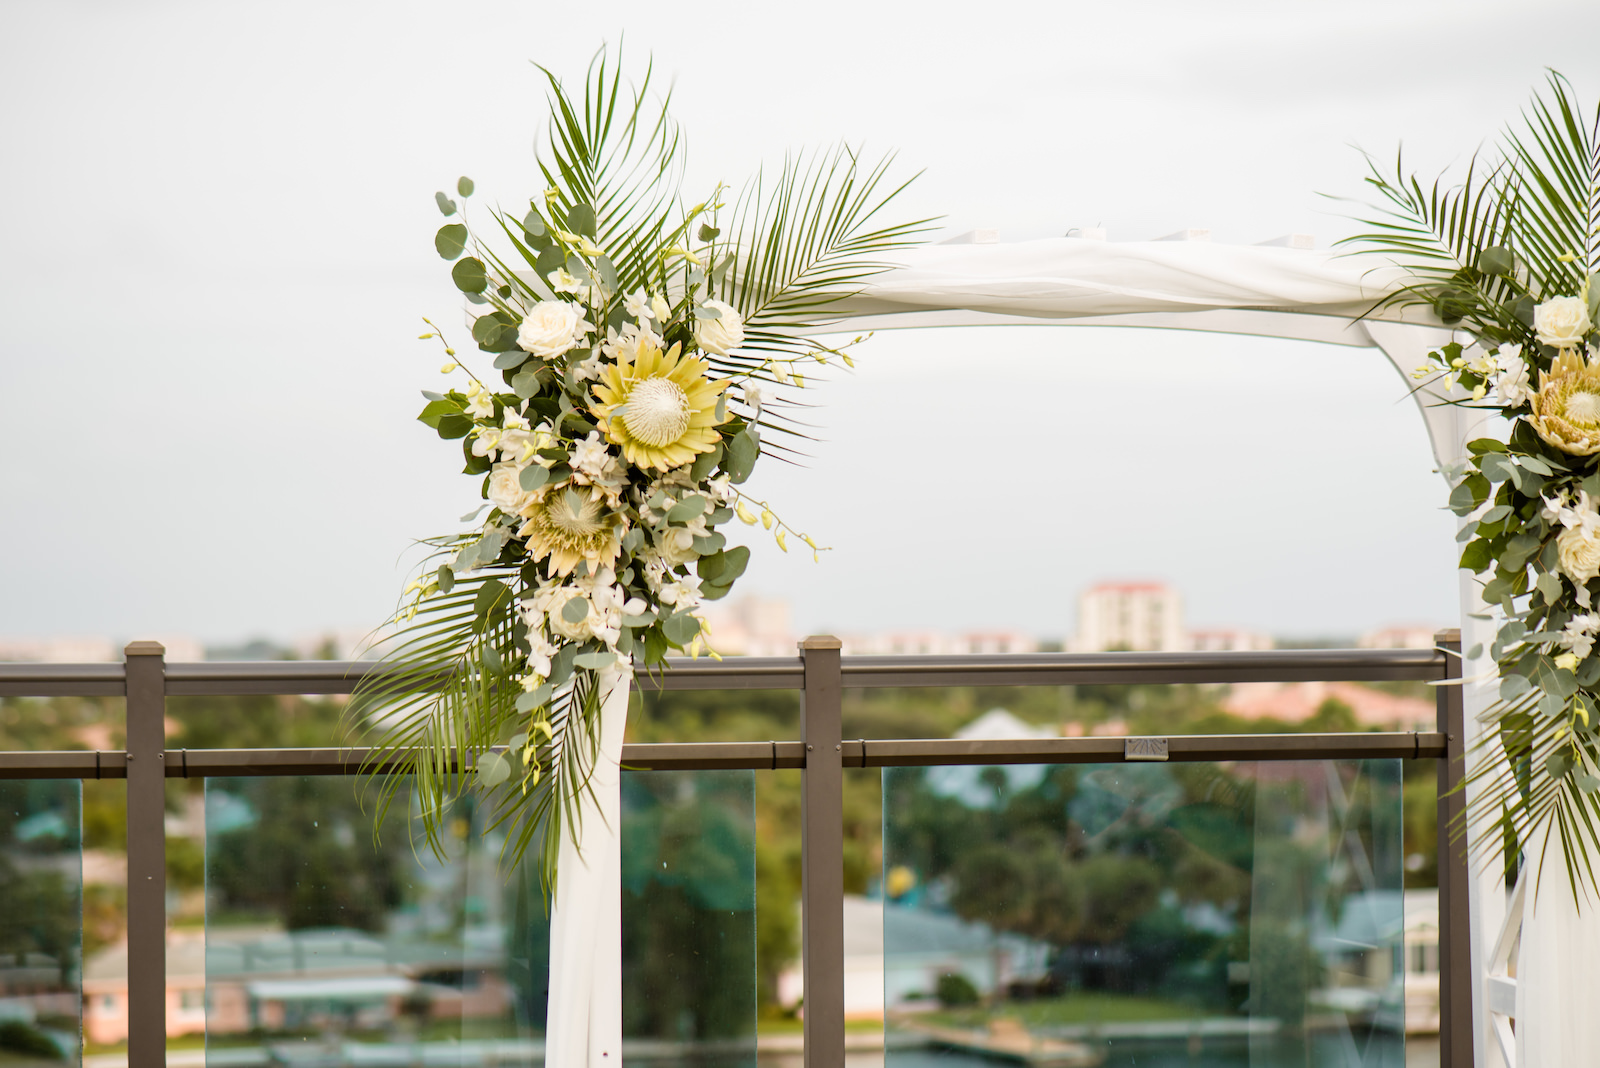 Neutral Boho Tropical Wedding Ceremony Decor, Lush Floral Arrangement on Arch, King Proteas, White Roses and Orchids, Palm Fronds, Eucalyptus | Tampa Bay Wedding Planner Perfecting the Plan | Waterfront St. Pete Wedding Venue The Hotel Zamora | Wedding Florist Iza's Flowers